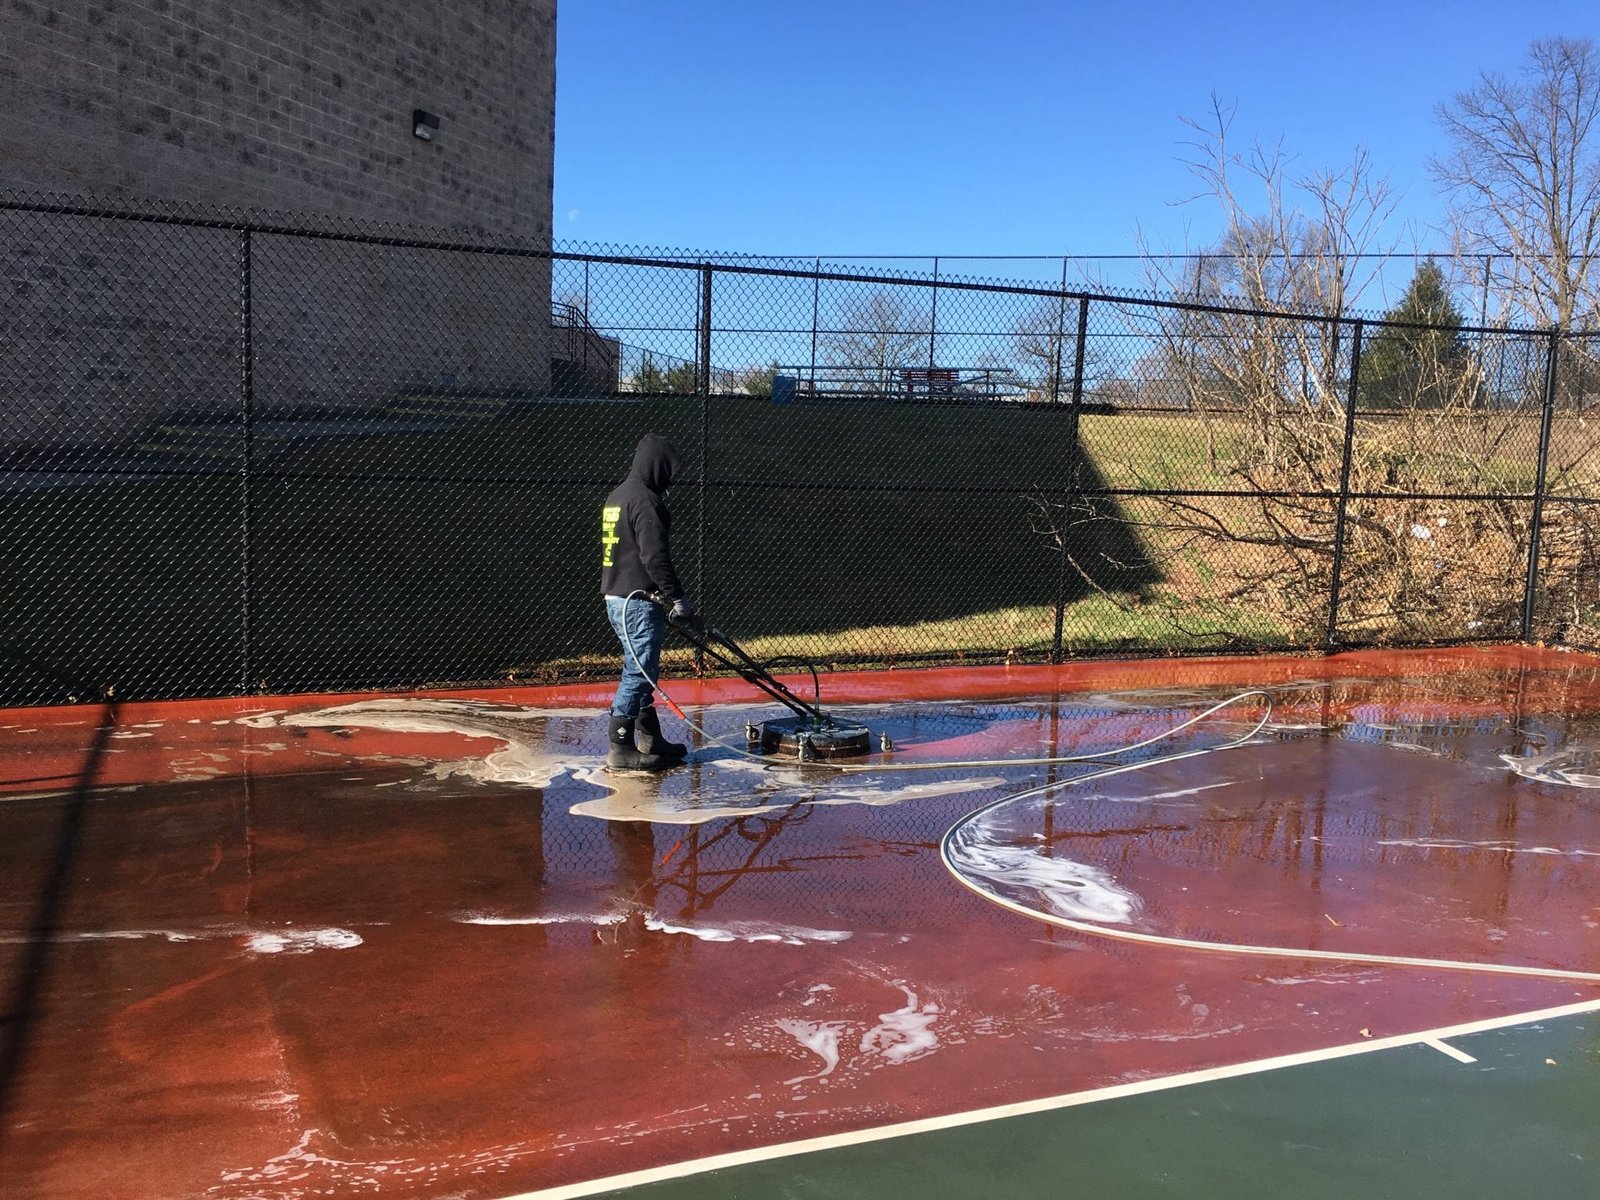 A safe and attractive business exterior is as easy as clean concrete! Our specialized Hot Water concrete cleaning for commercial surfaces is the ideal way to keep your place of business looking clean, fresh and inviting, while also helping to minimize the risk of “slip & fall” lawsuits.